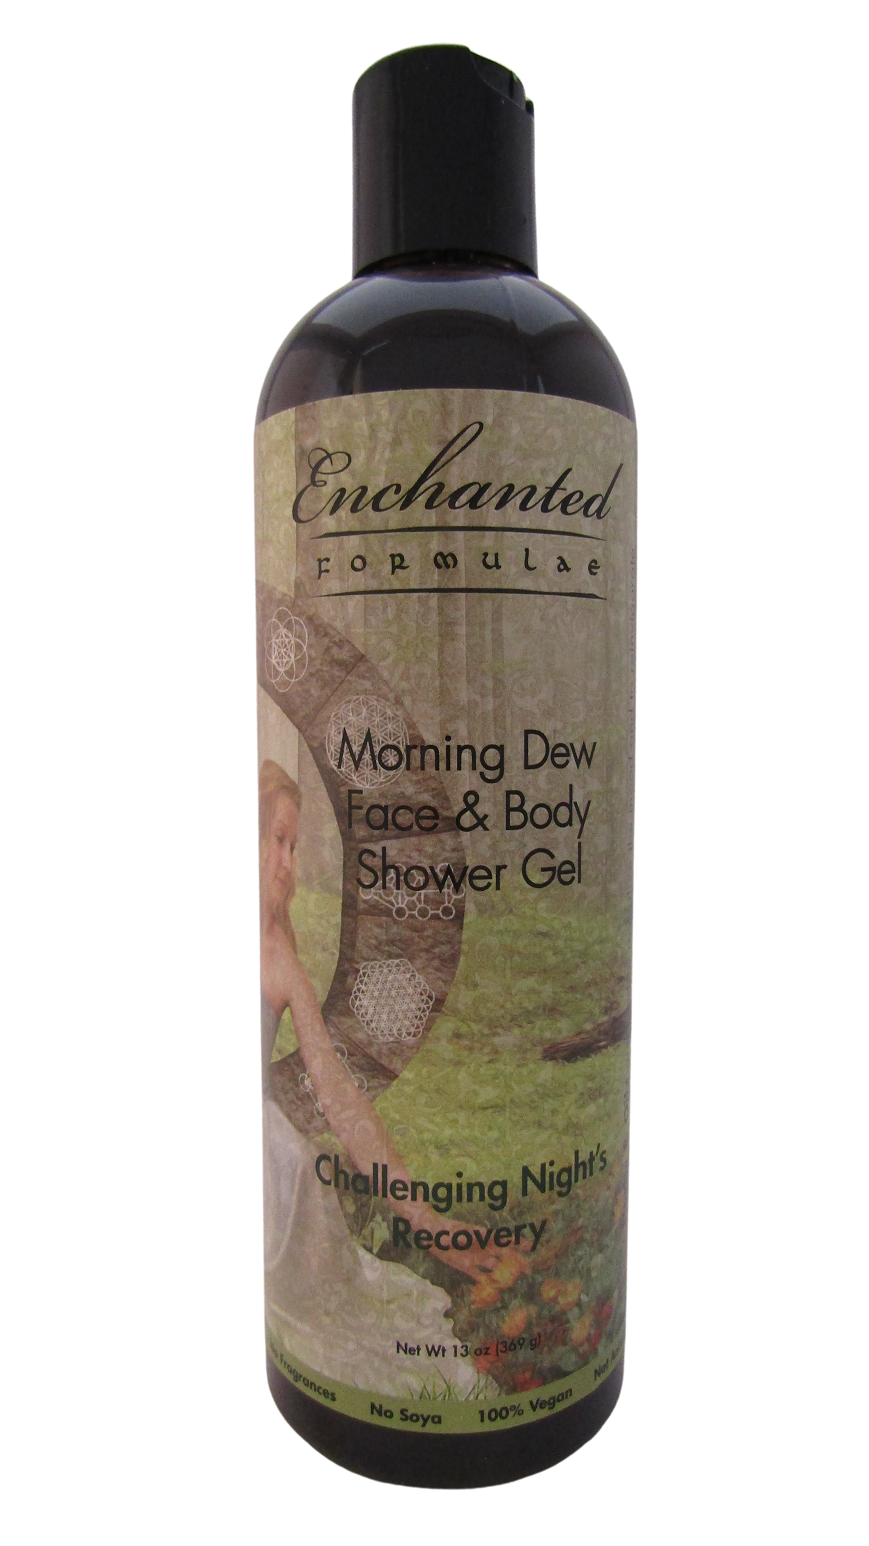 MORNING DEW SHOWER GEL, Challenging Night's Recovery